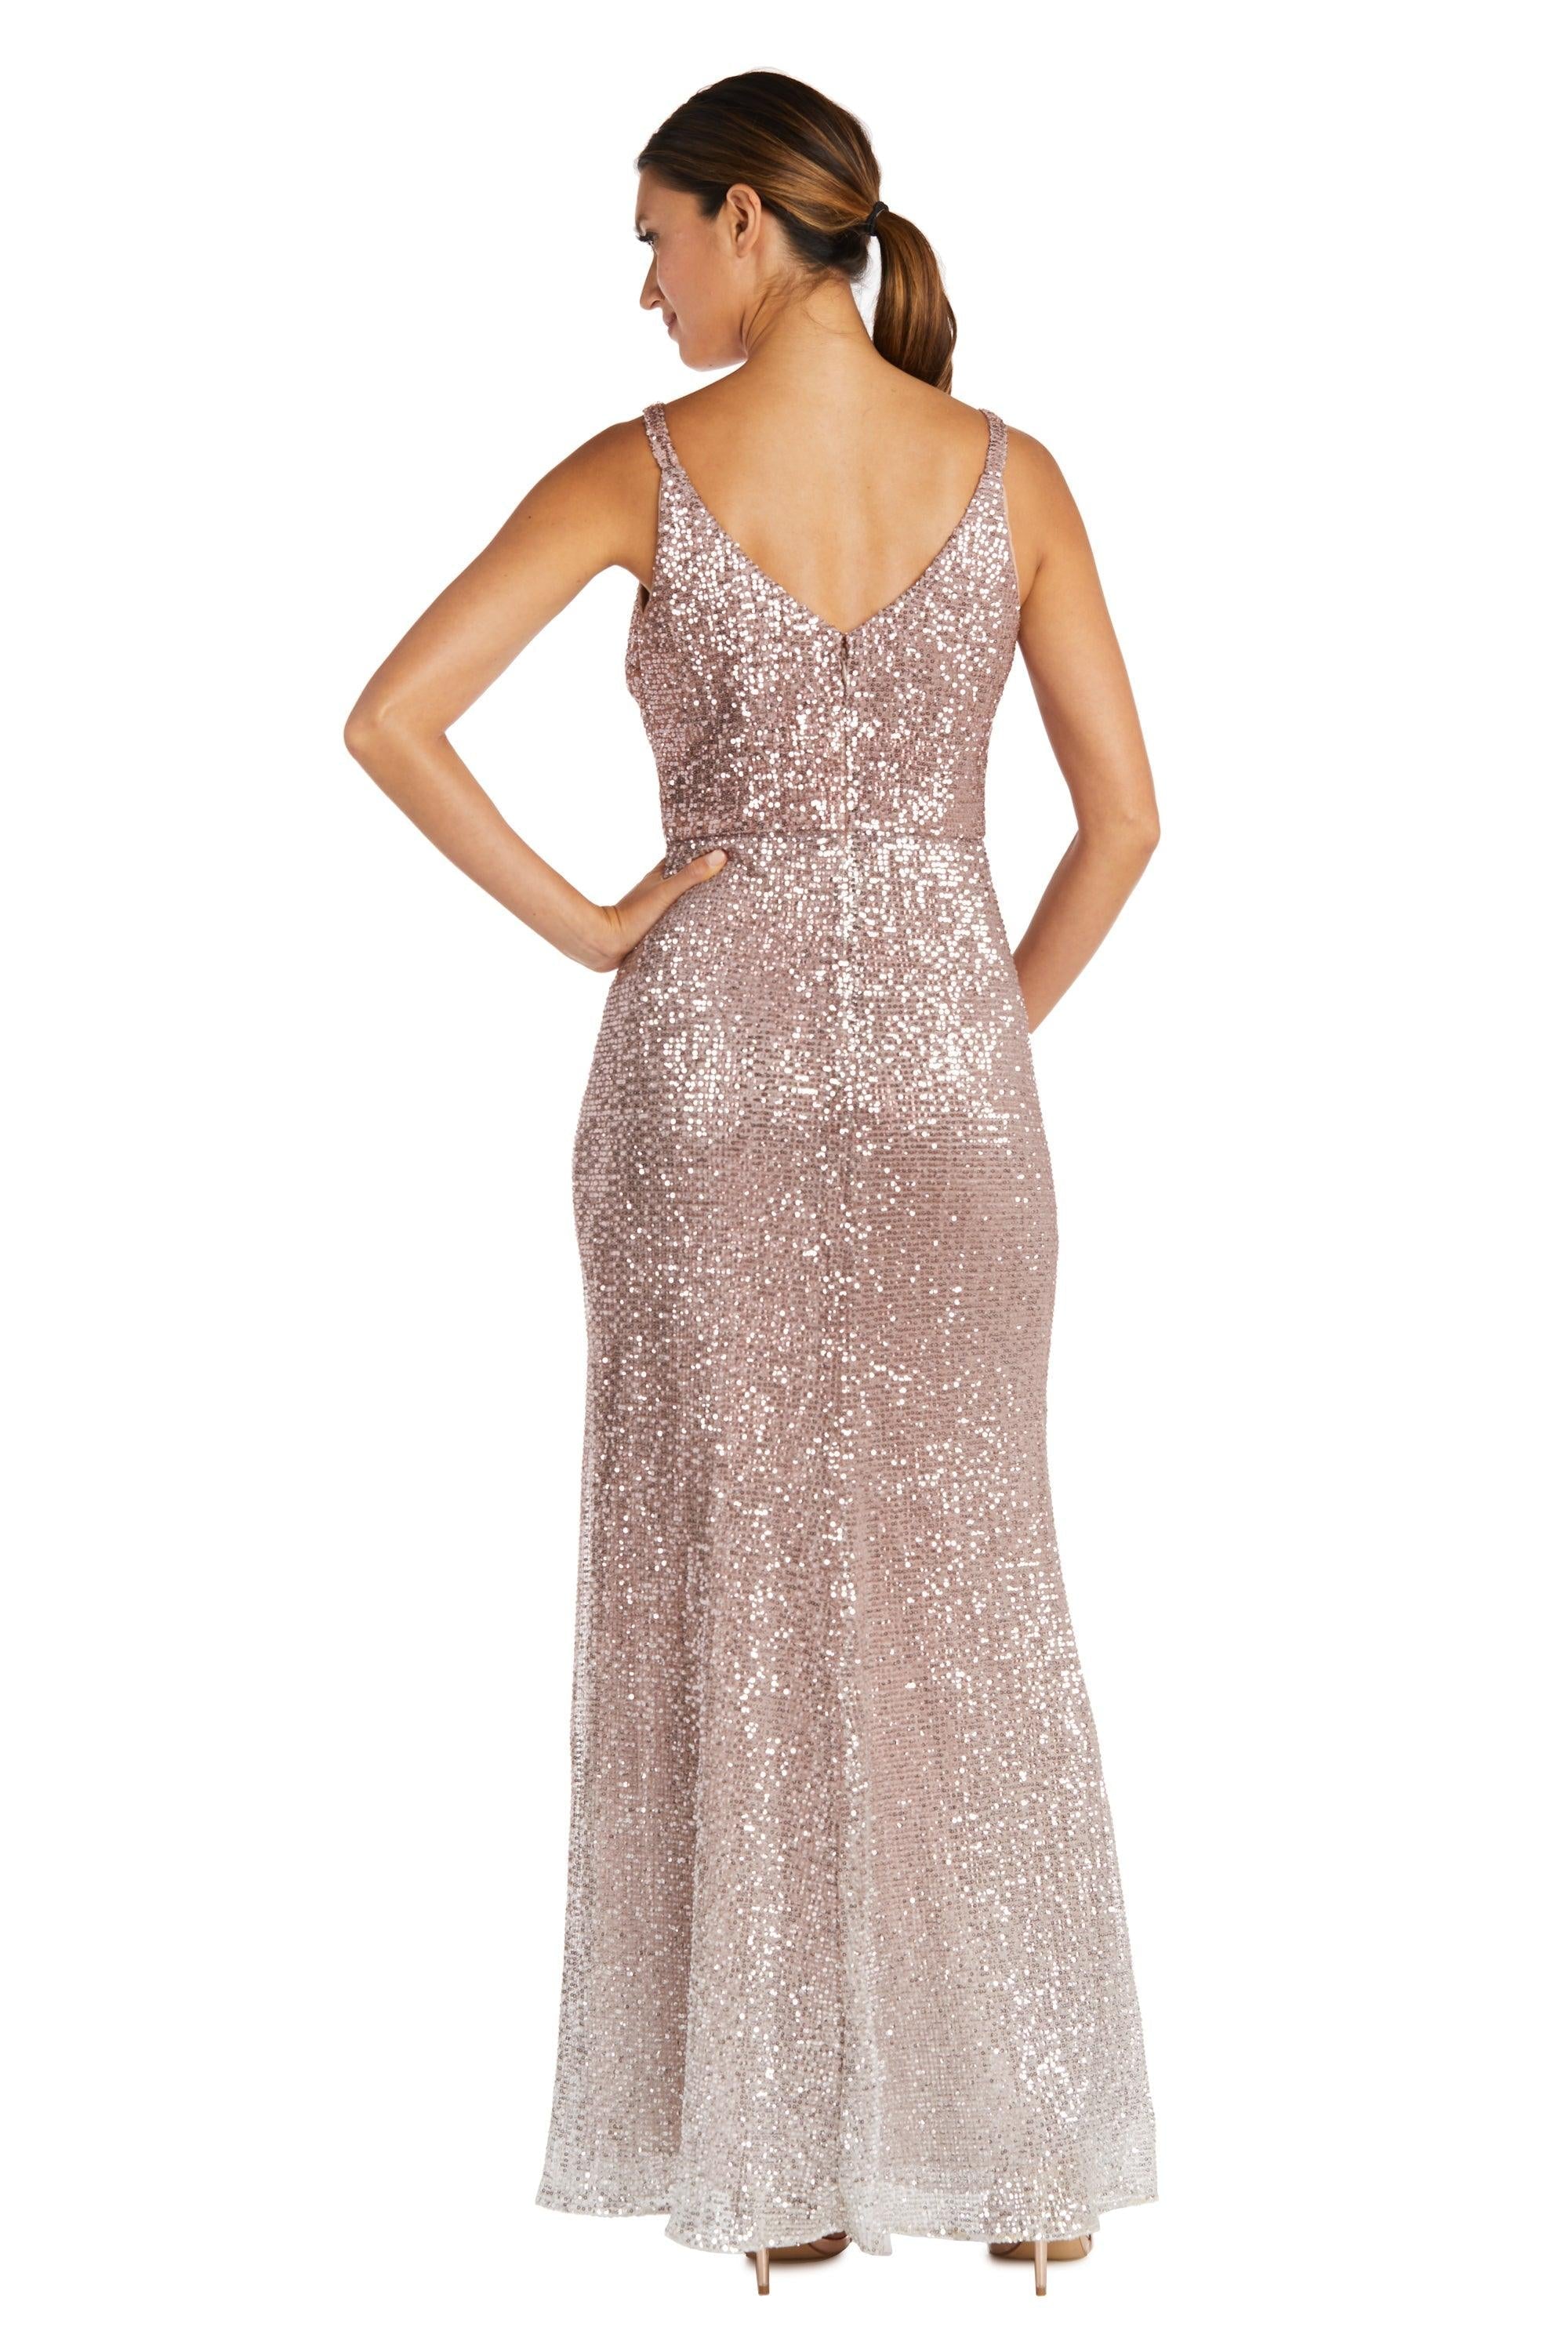 Nightway Long Formal Evening Dress 22086 - The Dress Outlet